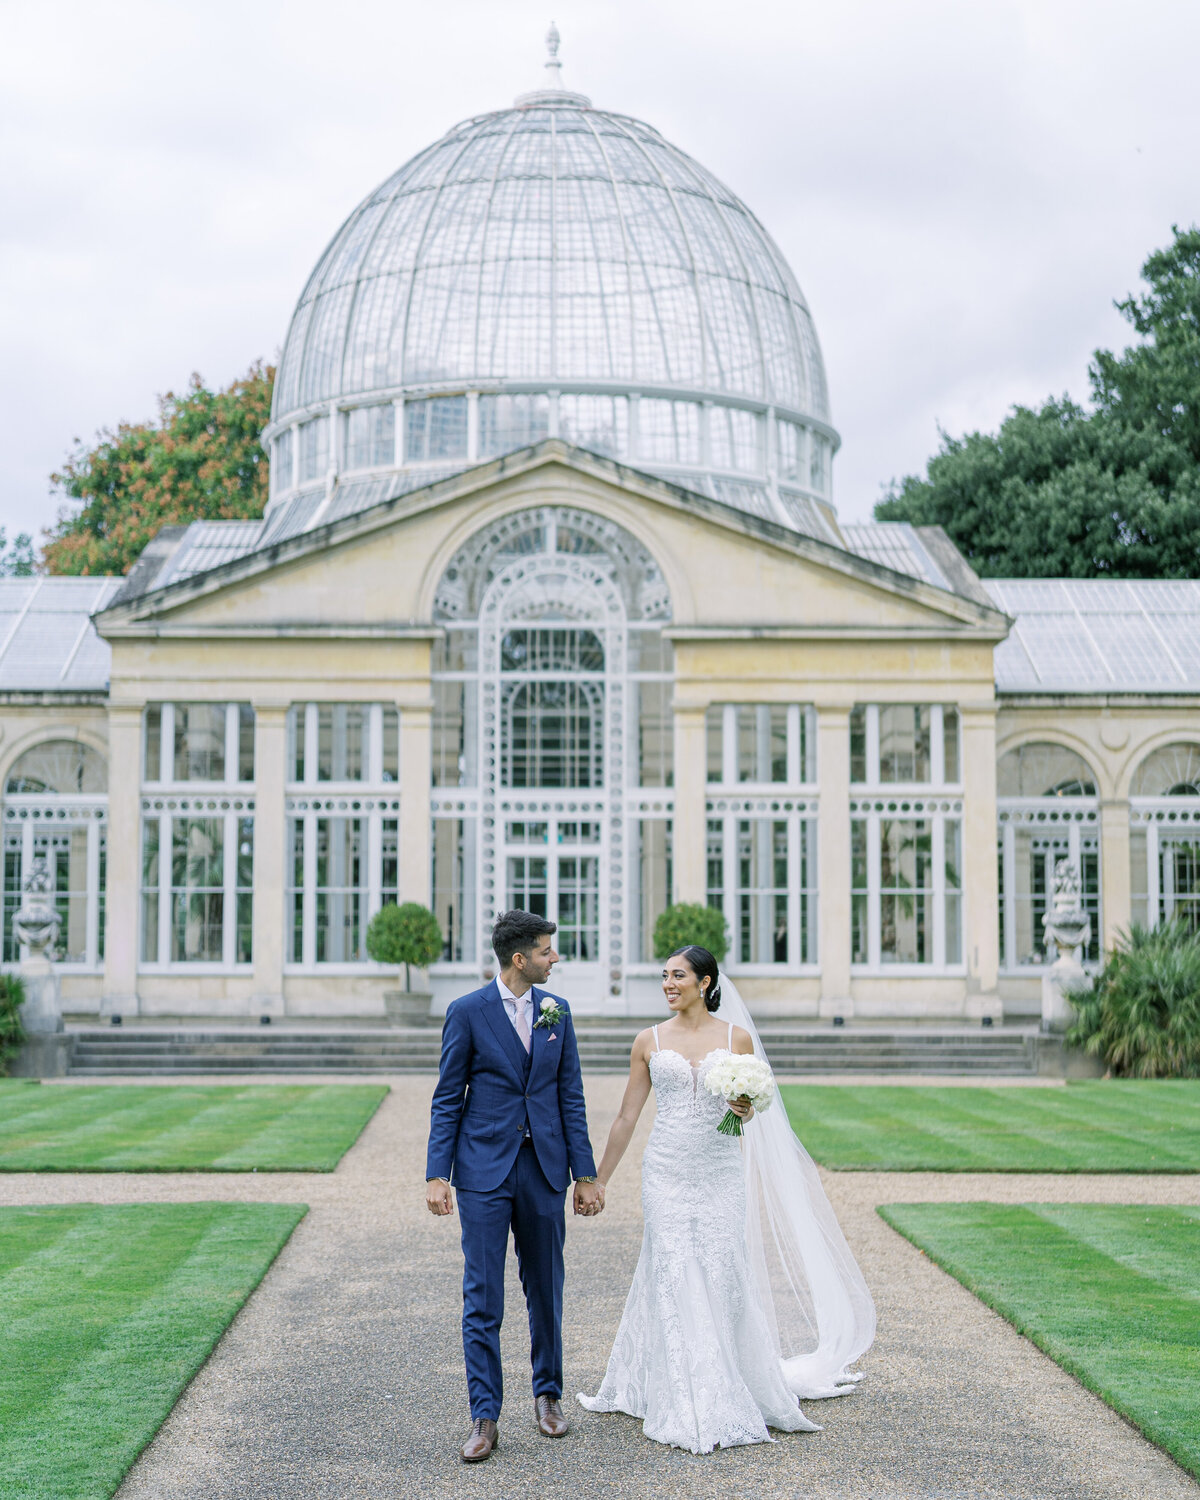 Bride and groom at glasshouse wedding in London wedding venue Syon Park